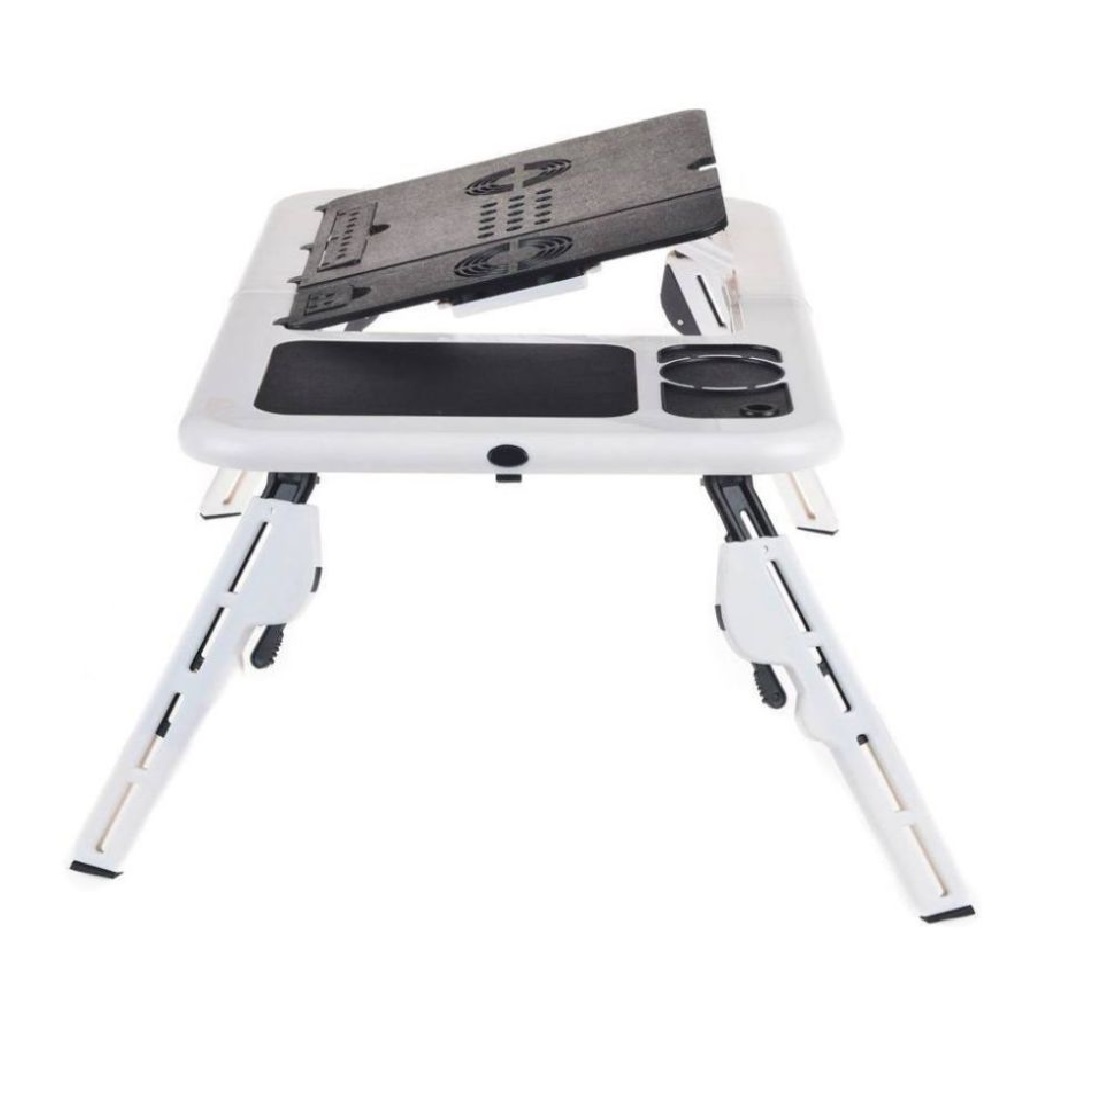 GHK H61 Portable Compact Flexible Foldable Laptop E-Table Multipurpose, Travel Friendly, Height Adjustable with 2 USB Cooling Fans